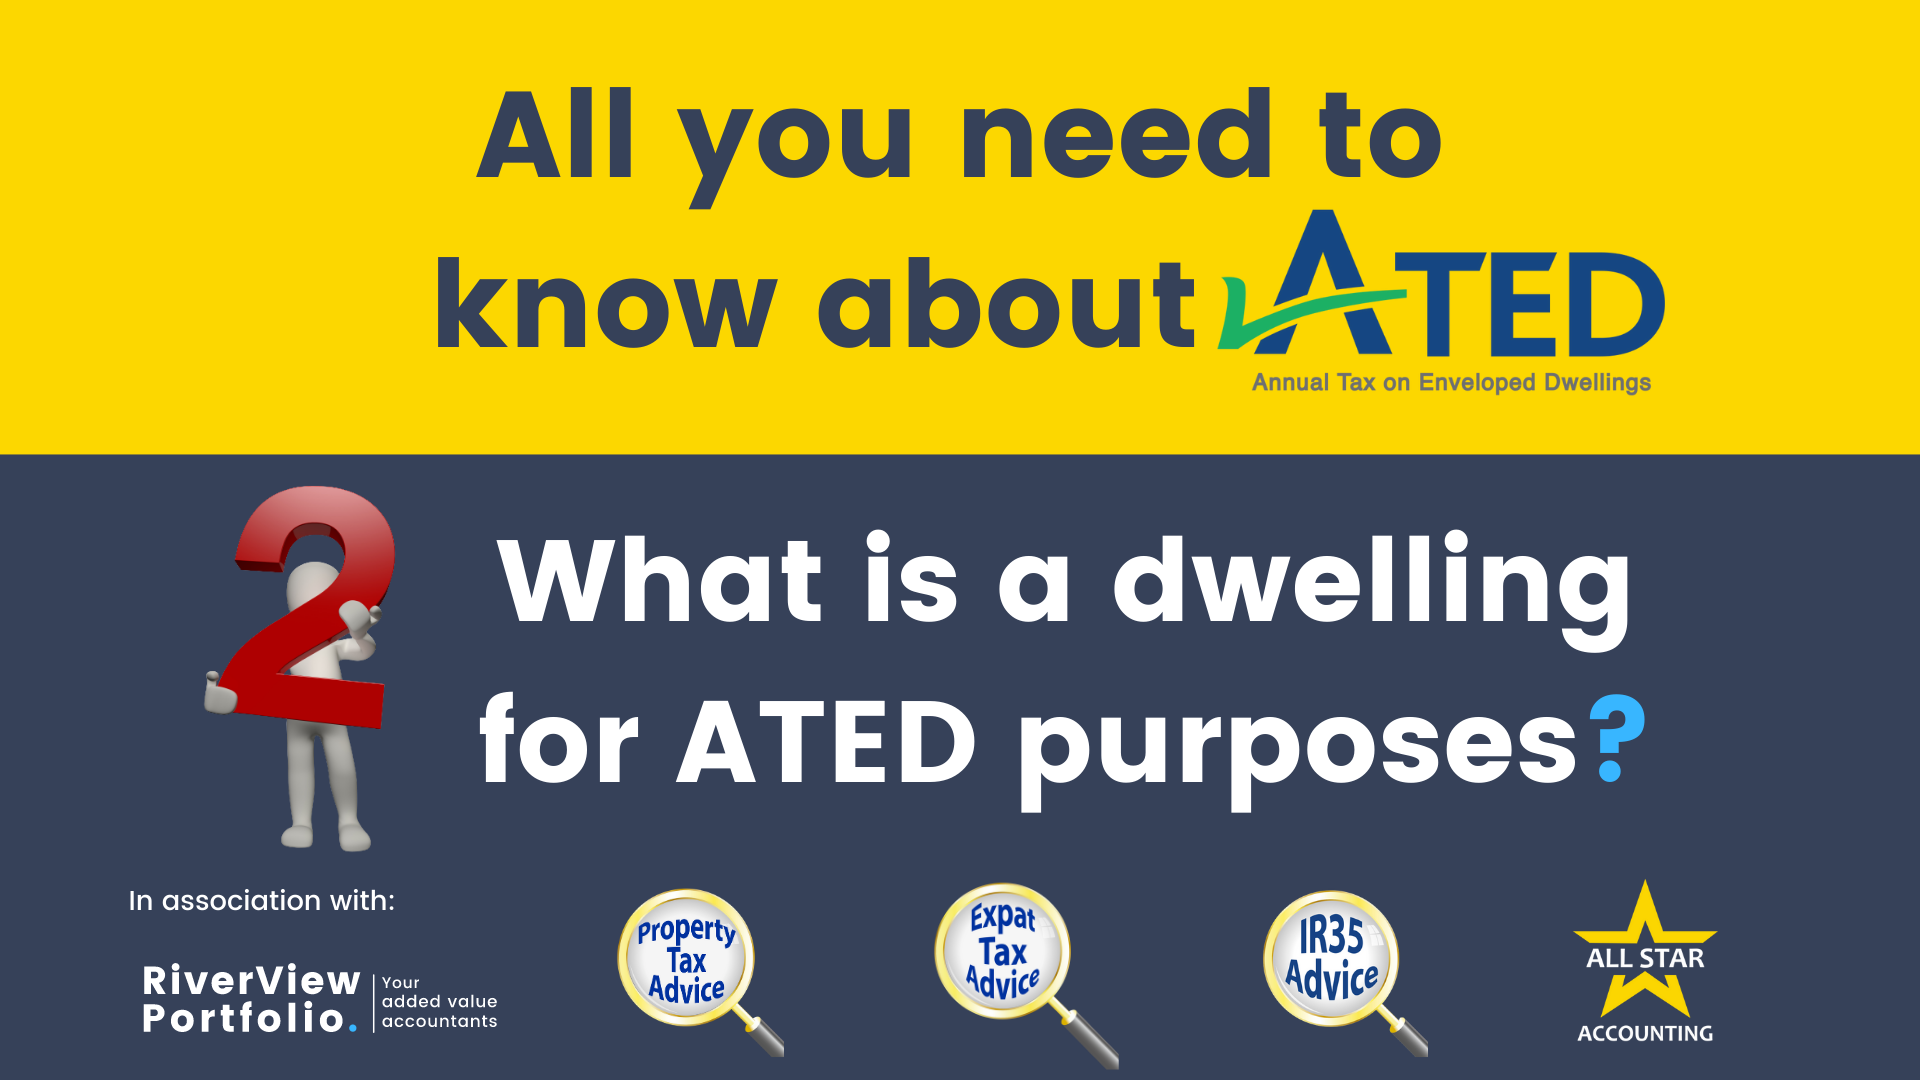 ated, annual tax on envelope dwellings, dwelling for ated purposes